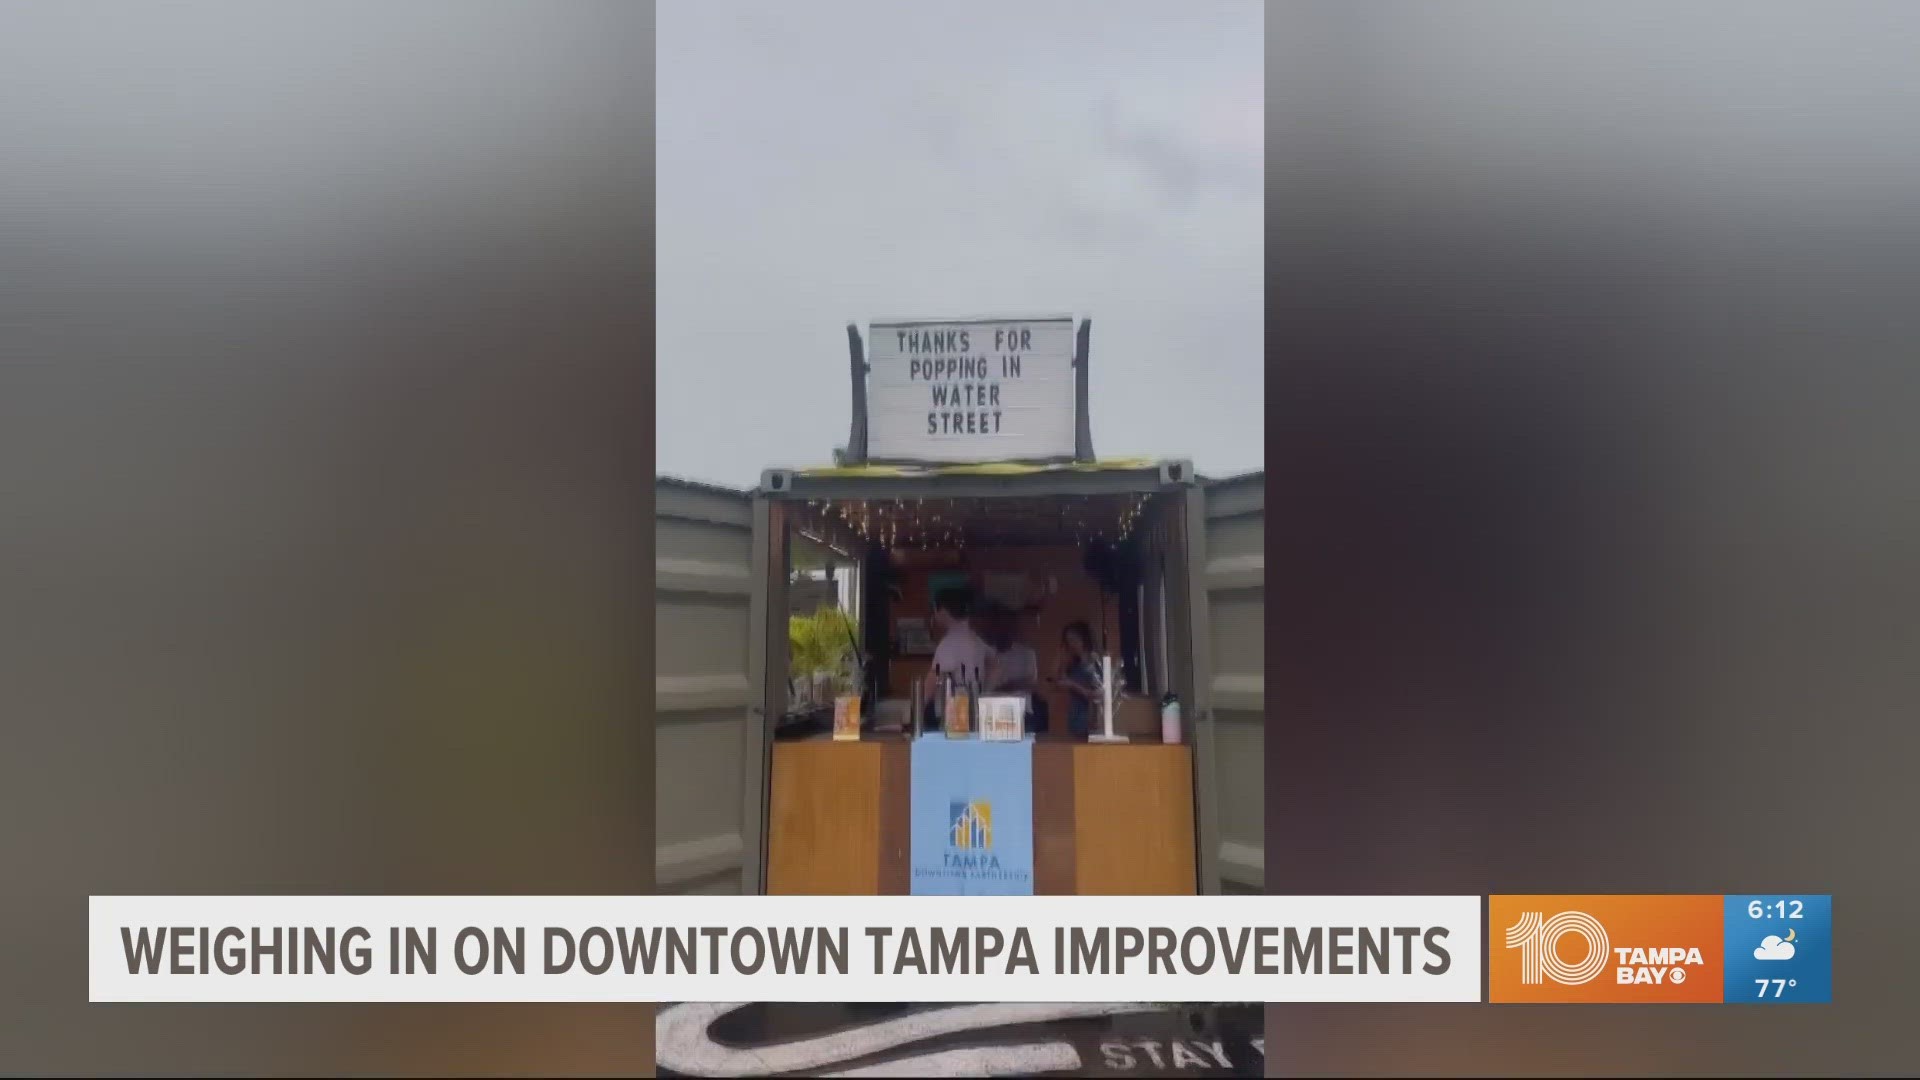 The Tampa Downtown Partnership wants feedback from everyone who works, lives or plays here.